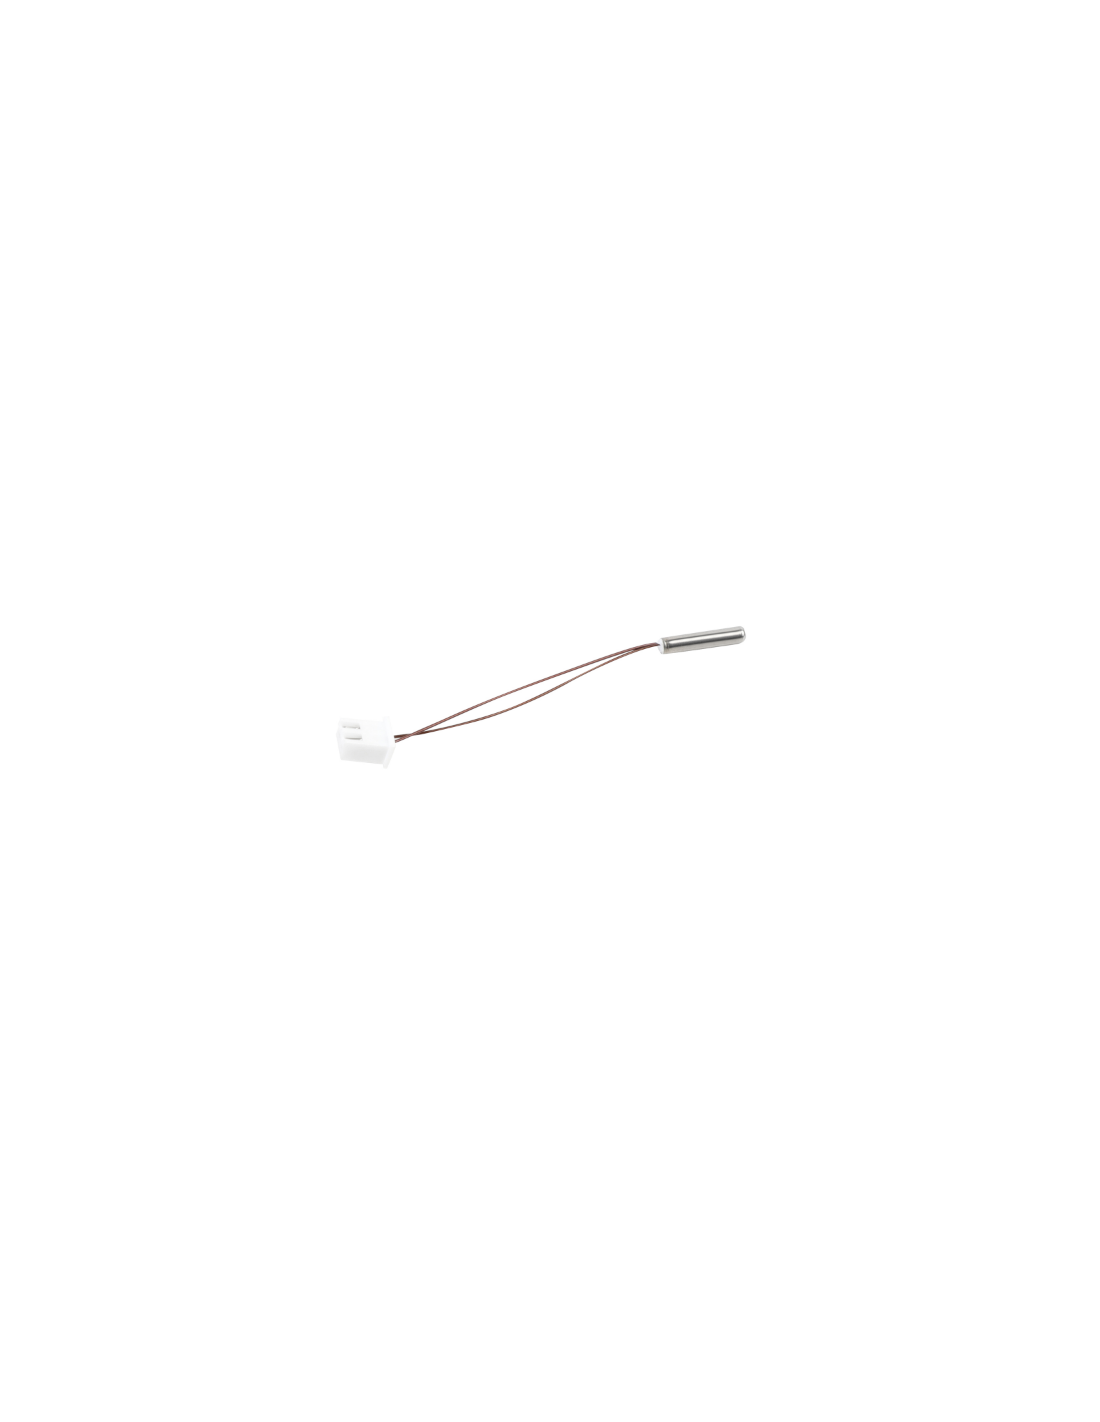 Buy WOL3D Original Creality Thermistor for ender 3 S1 & S1 Plus